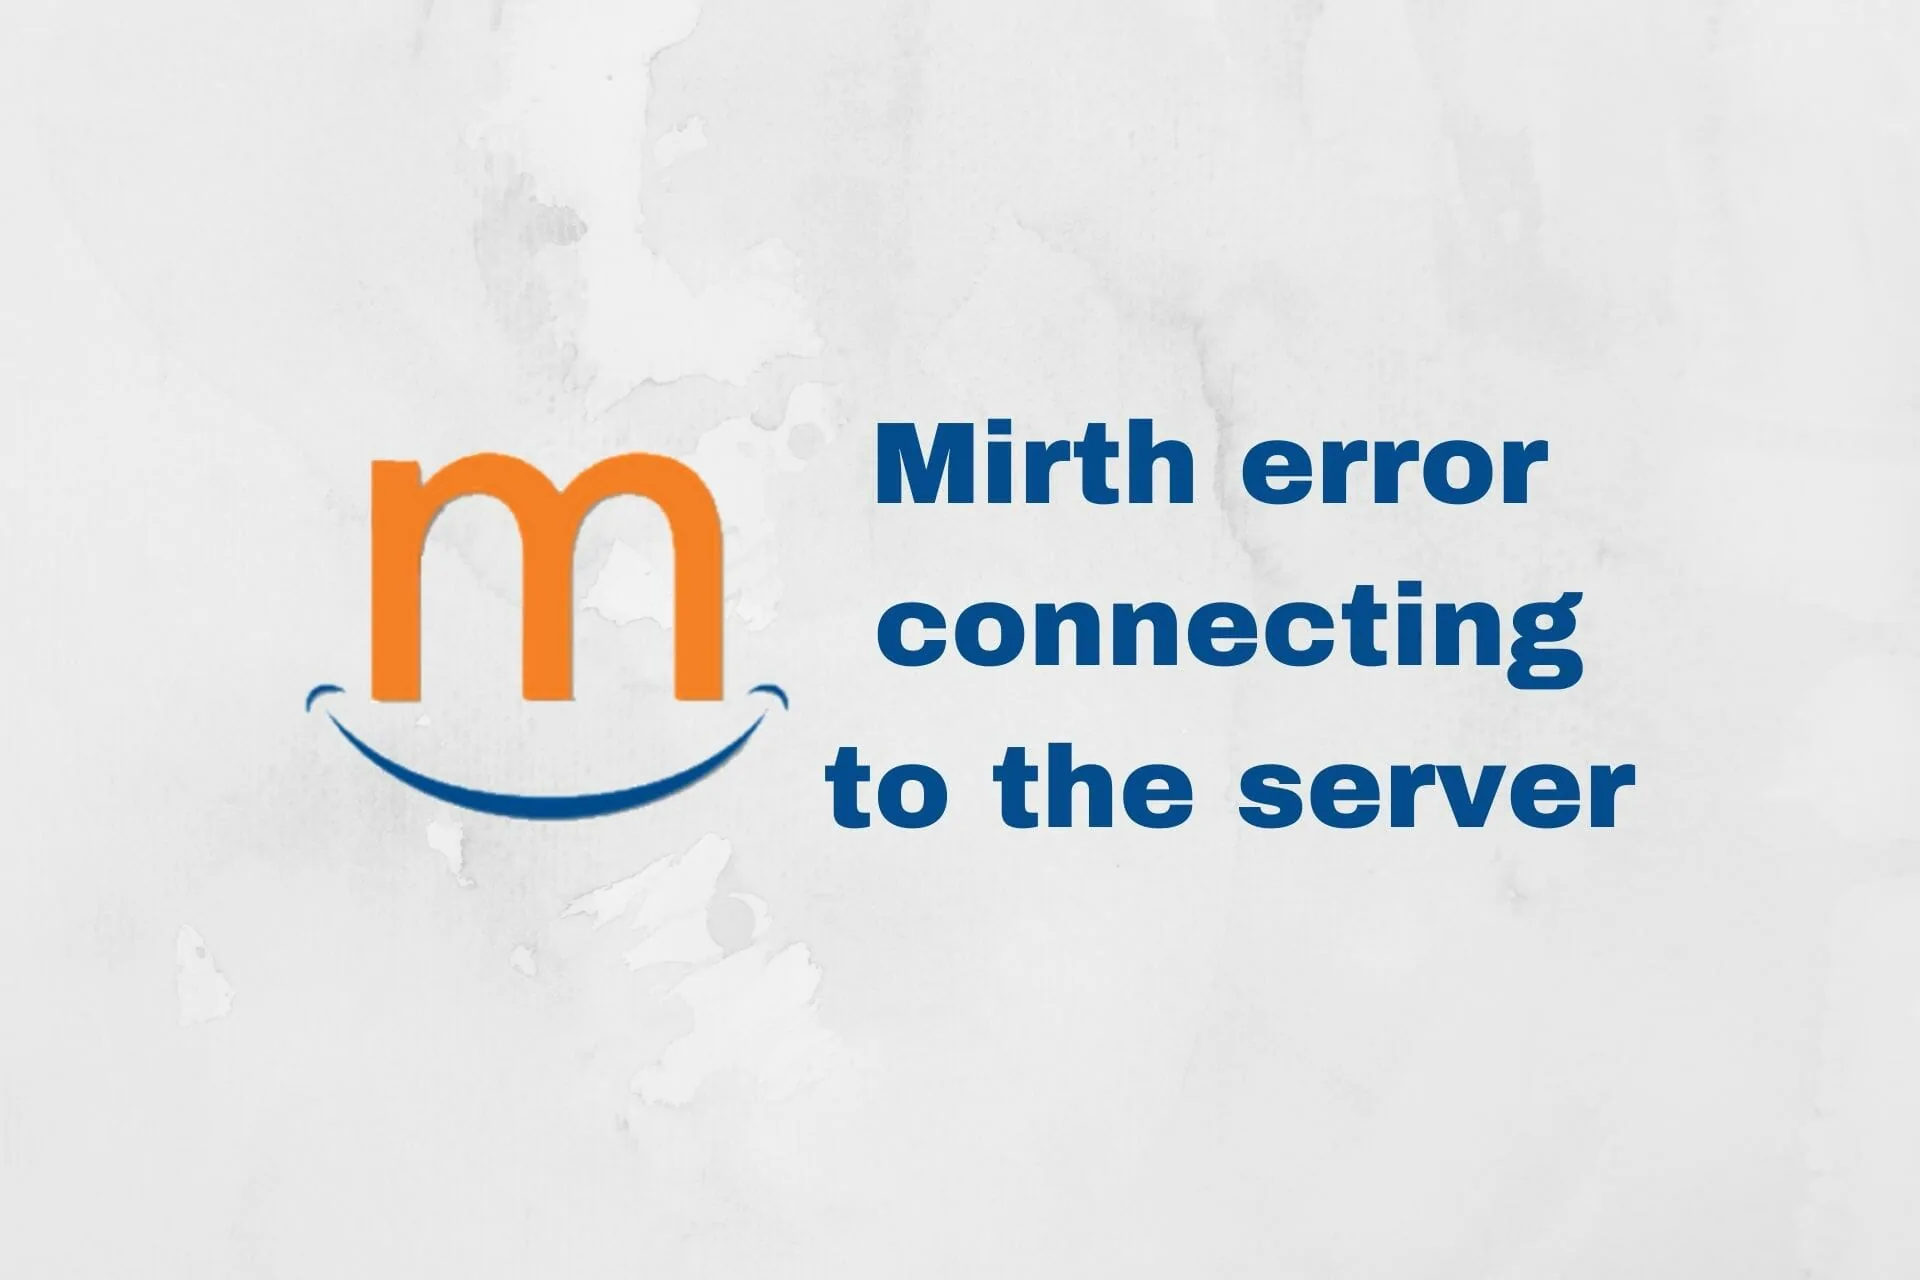 Mirth error connecting to the server